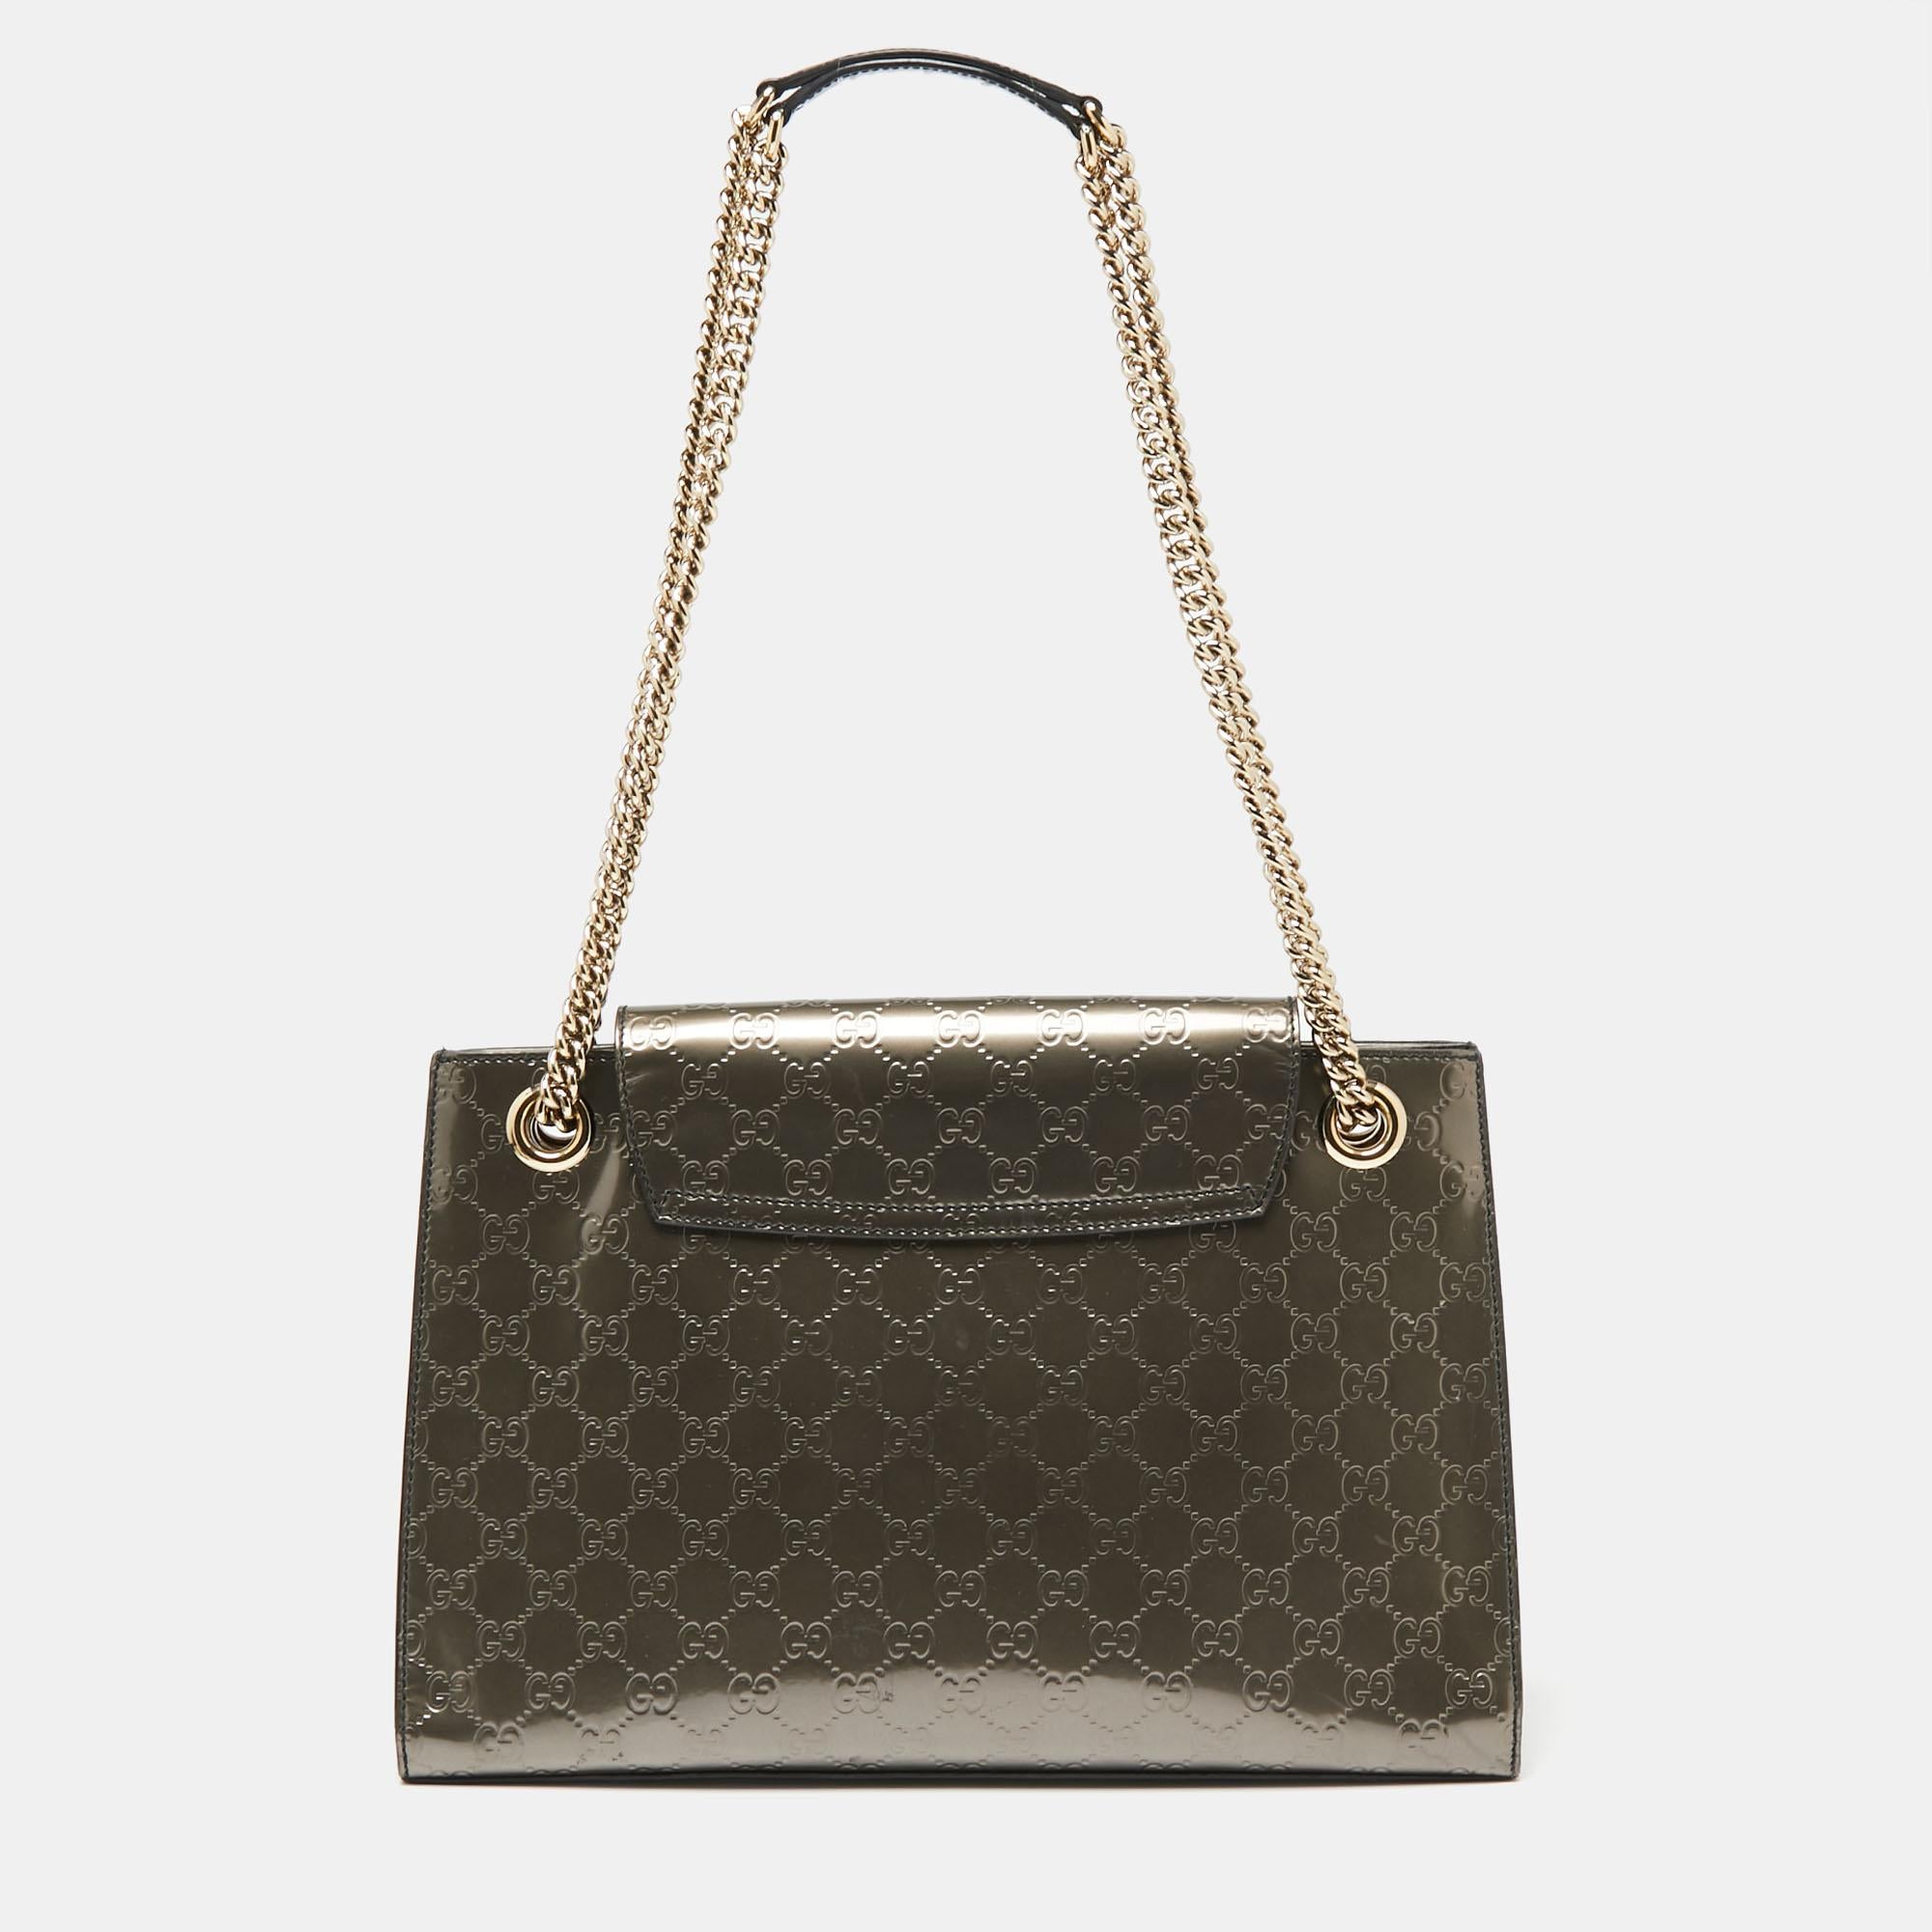 Made from Guccissima patent leather, this Gucci Emily bag is enriched with the brand's heritage details. Its grey exterior is elevated with a tassel attached to the Horsebit closure on the front and it features dual-chain leather handles. Lined with